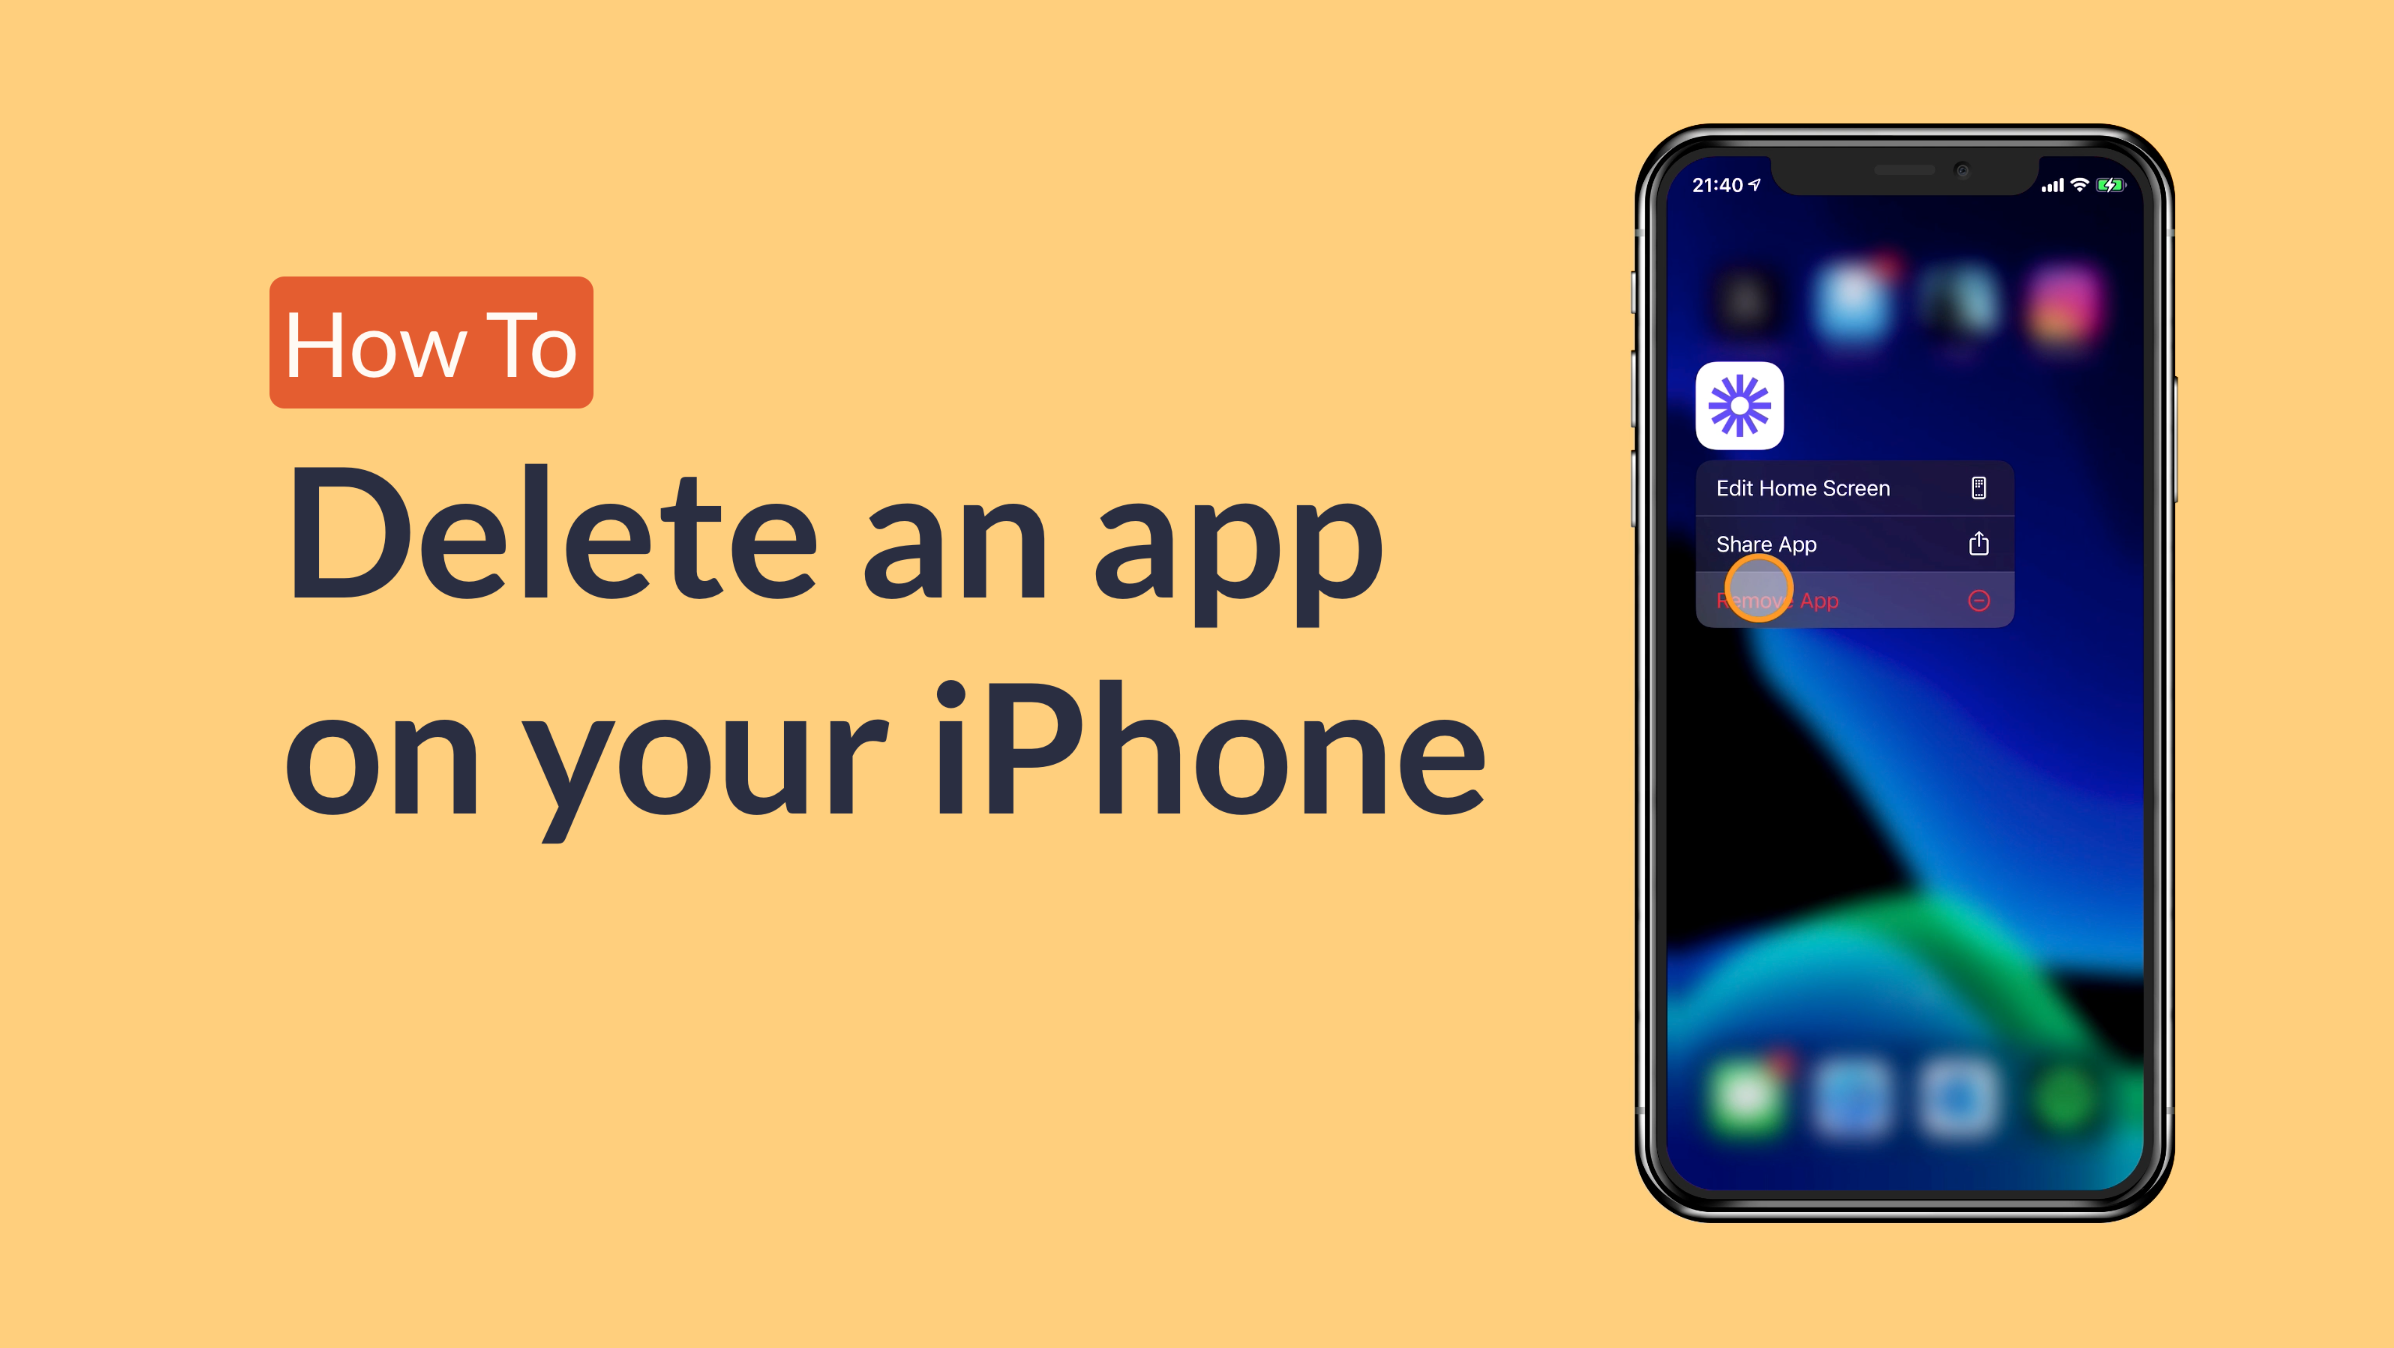 Discover how to delete an app on your iPhone and more at Tech Lifesavers